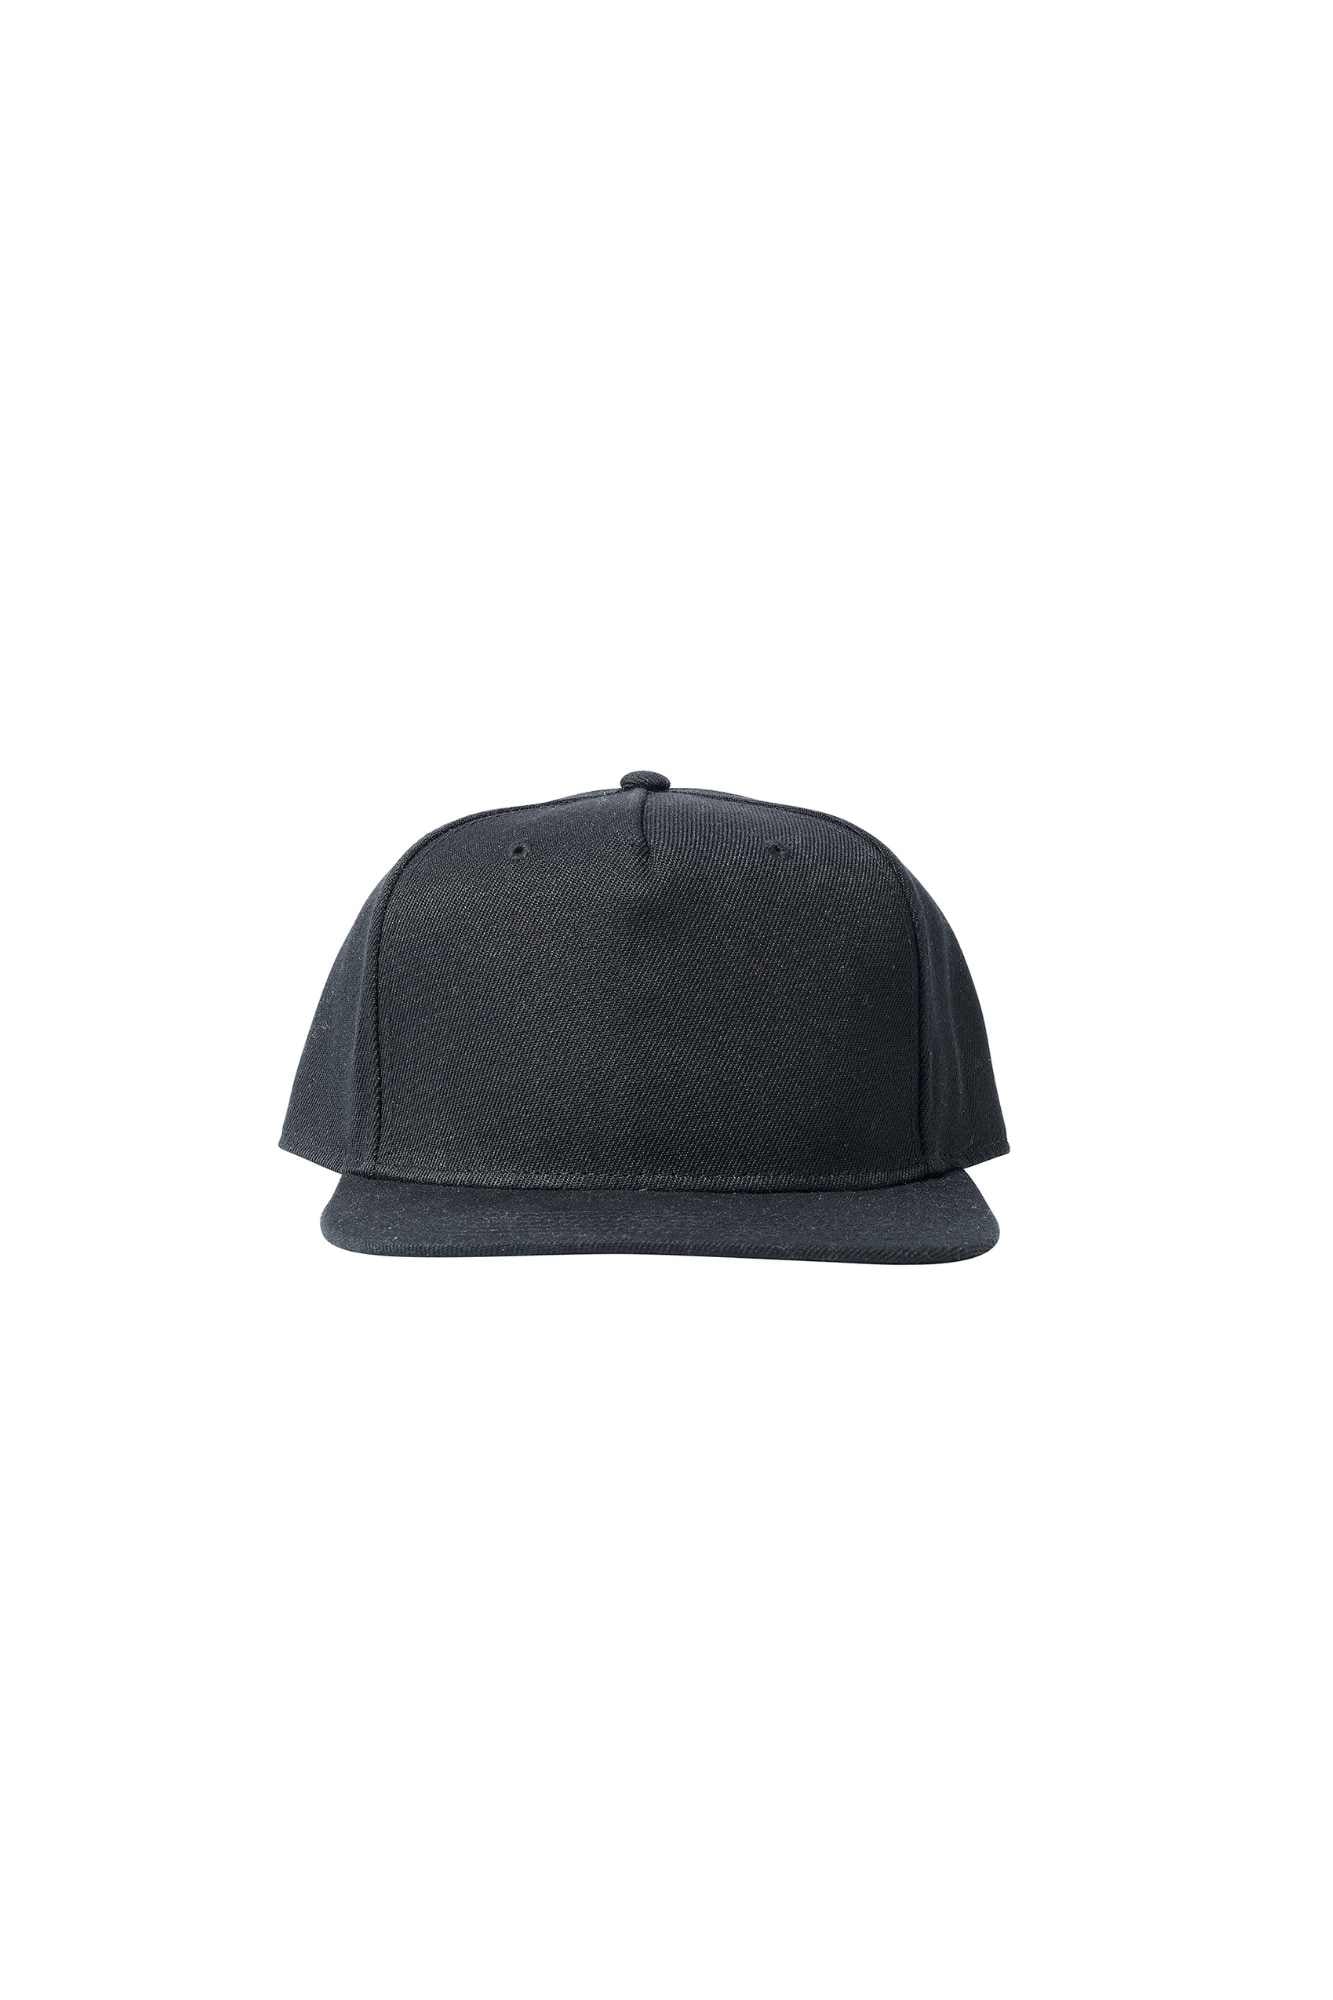 The Flat Peak Snap Back features visible stitching and is available at wholesale prices 